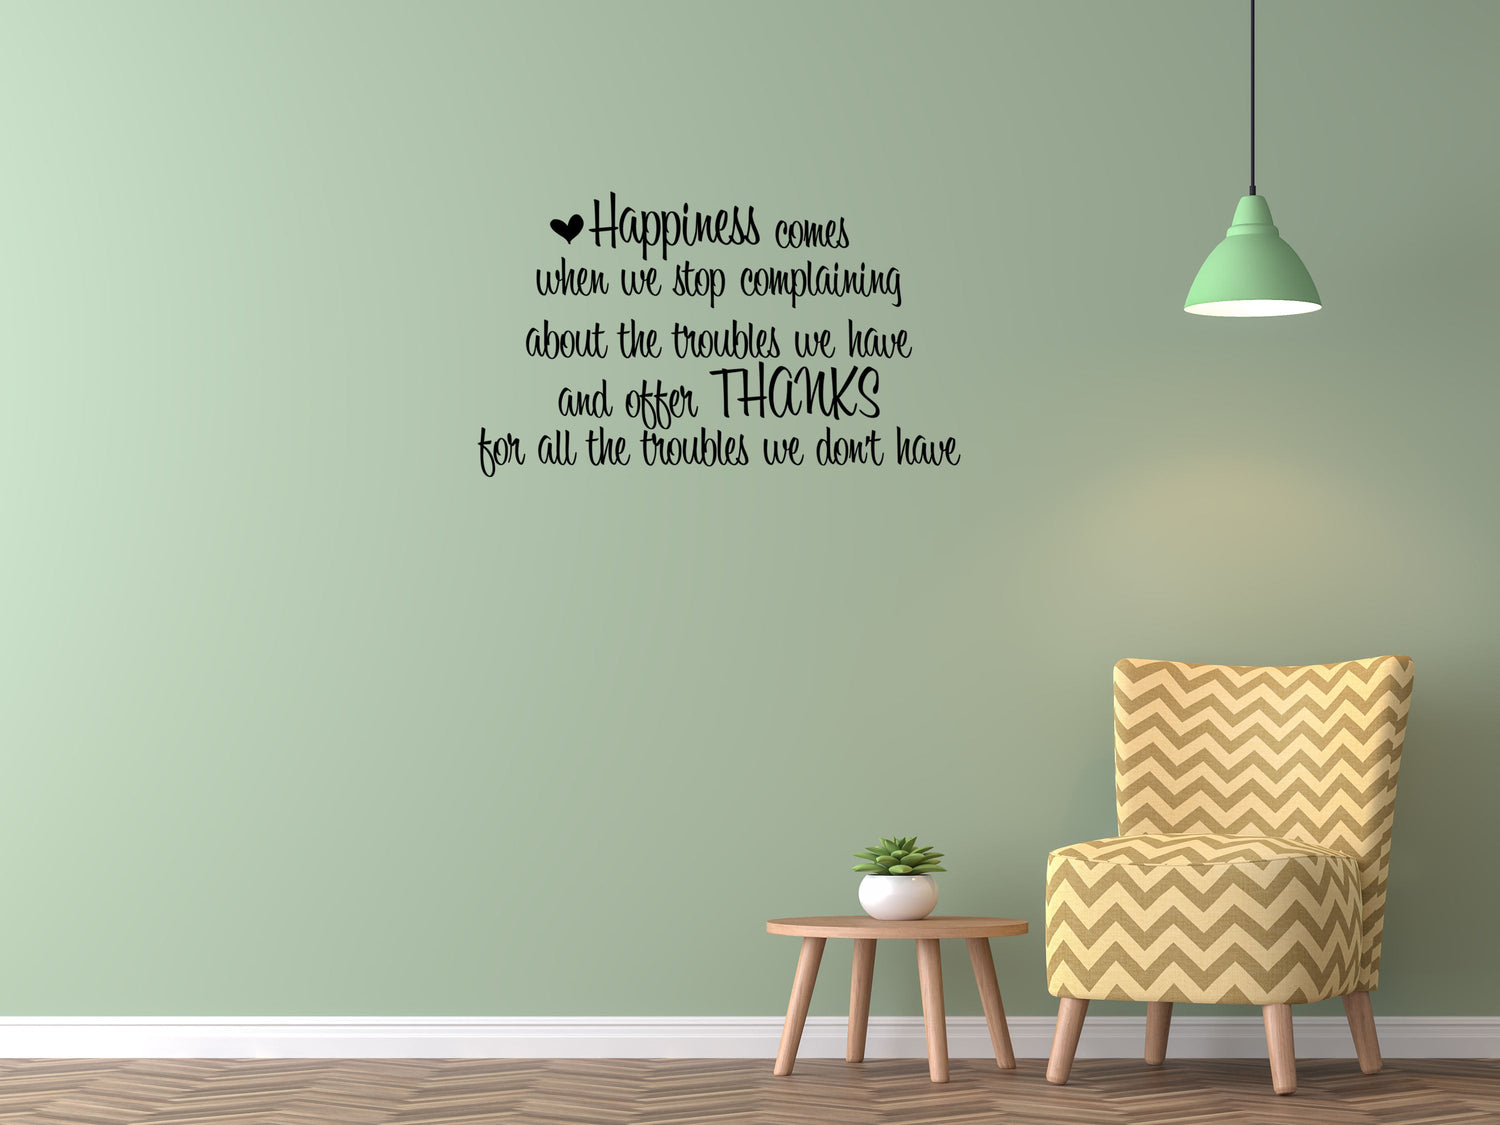 Happiness Comes Inspirational Wall Decal Quote - Motivational Wall Quote - Happy Decal Sticker - Thankful Wall Quote Decal Art Vinyl Wall Decal Inspirational Wall Signs 